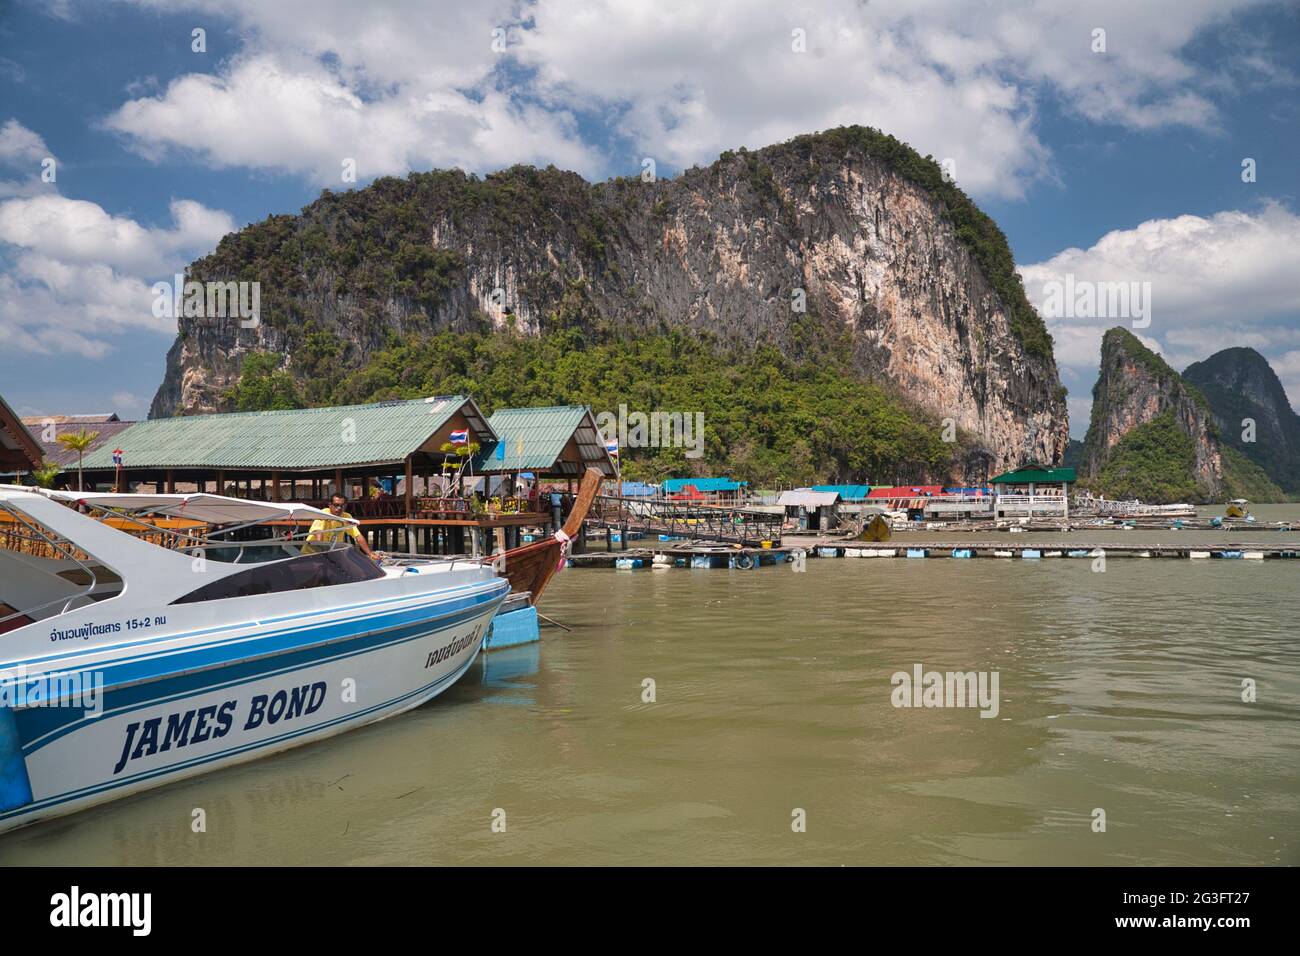 A modern motor boat moored at a water village built on stilts at Phang Nga, Thailand, with enormous rock and cliffs in the background Stock Photo